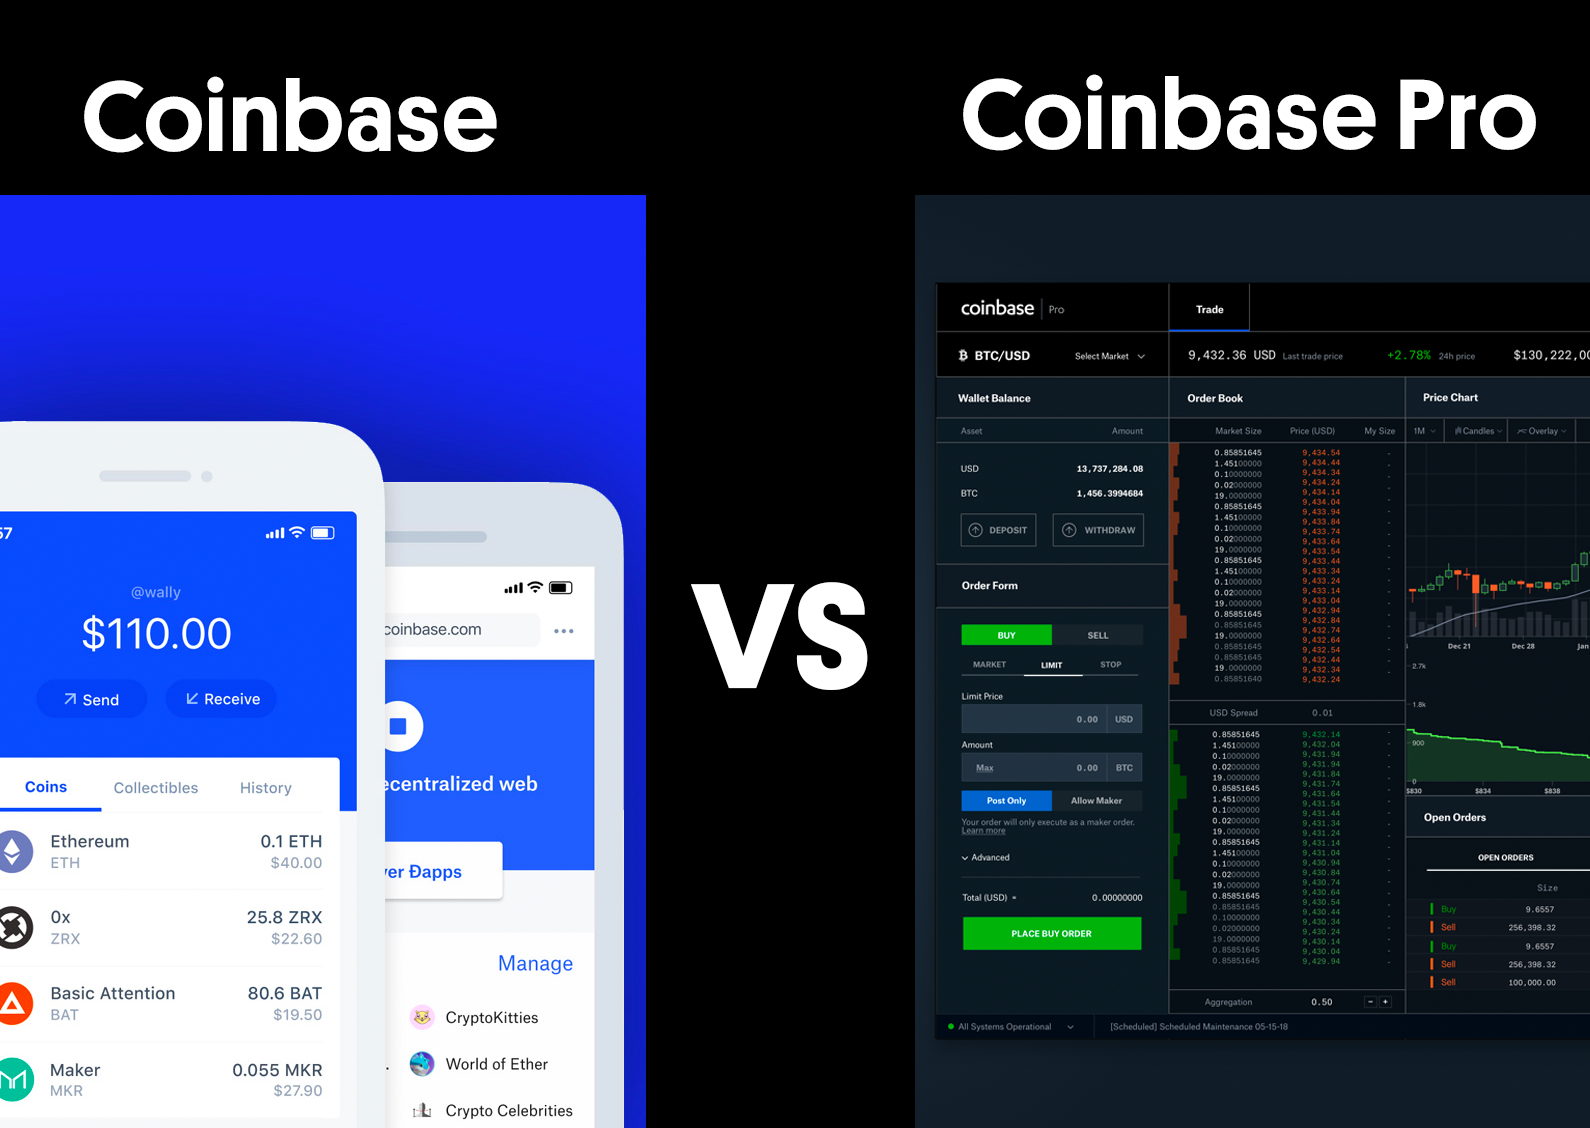 Network doesn't exist For Withdraw - Exchange/Pro API - Coinbase Cloud Forum